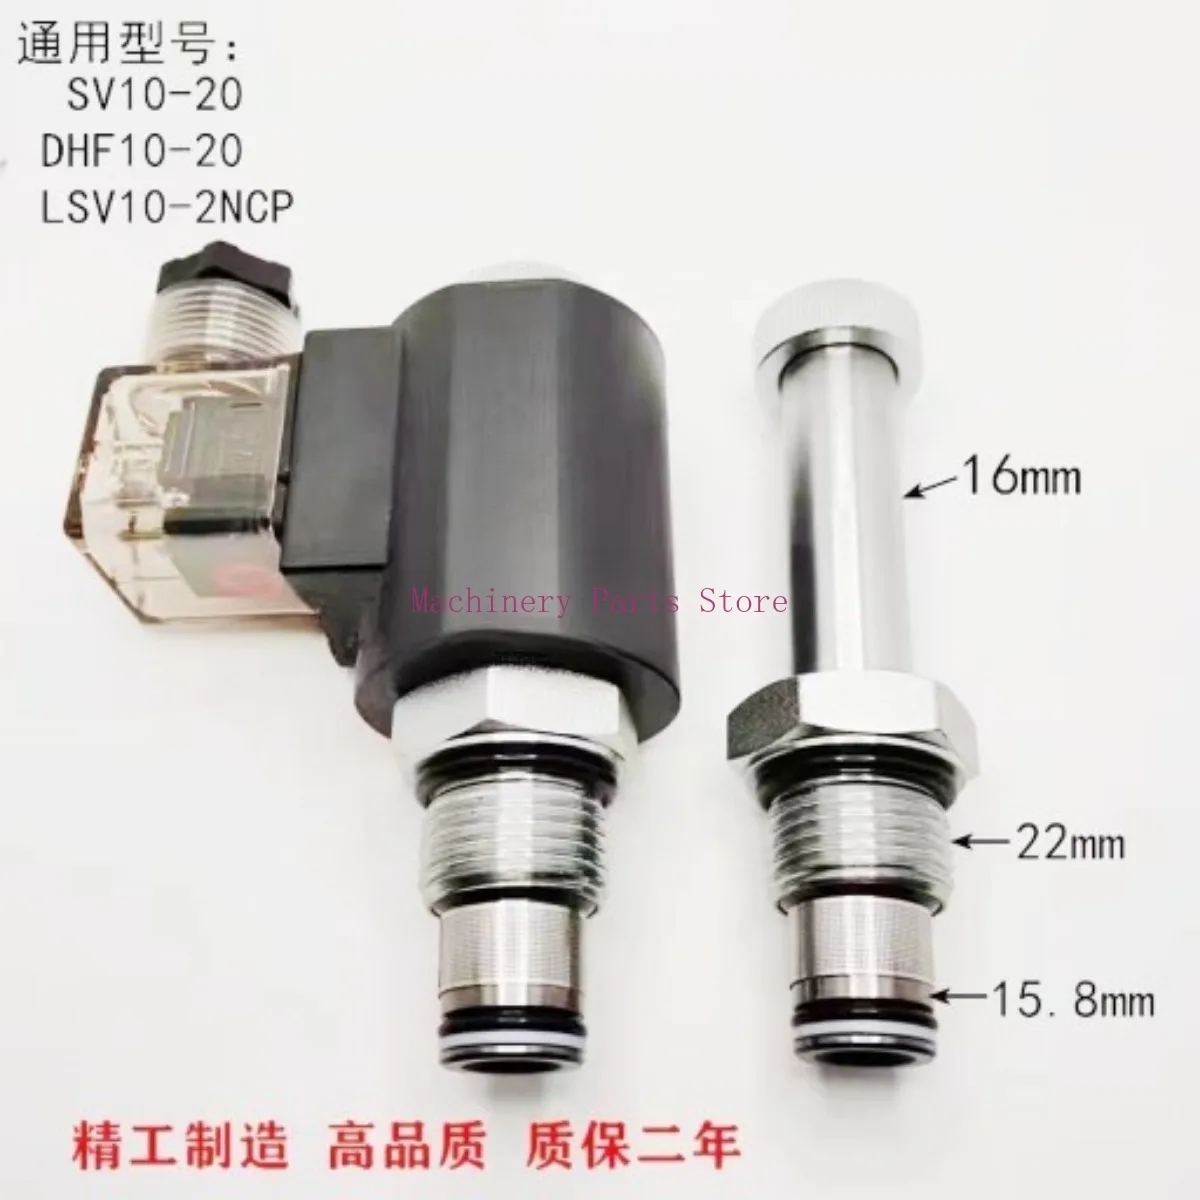 

Hydraulic Pressure Relief Valve Two Position Two Normally Closed DHF10-220 Solenoid Valve Threaded Plug-in SV10-20 DC24V